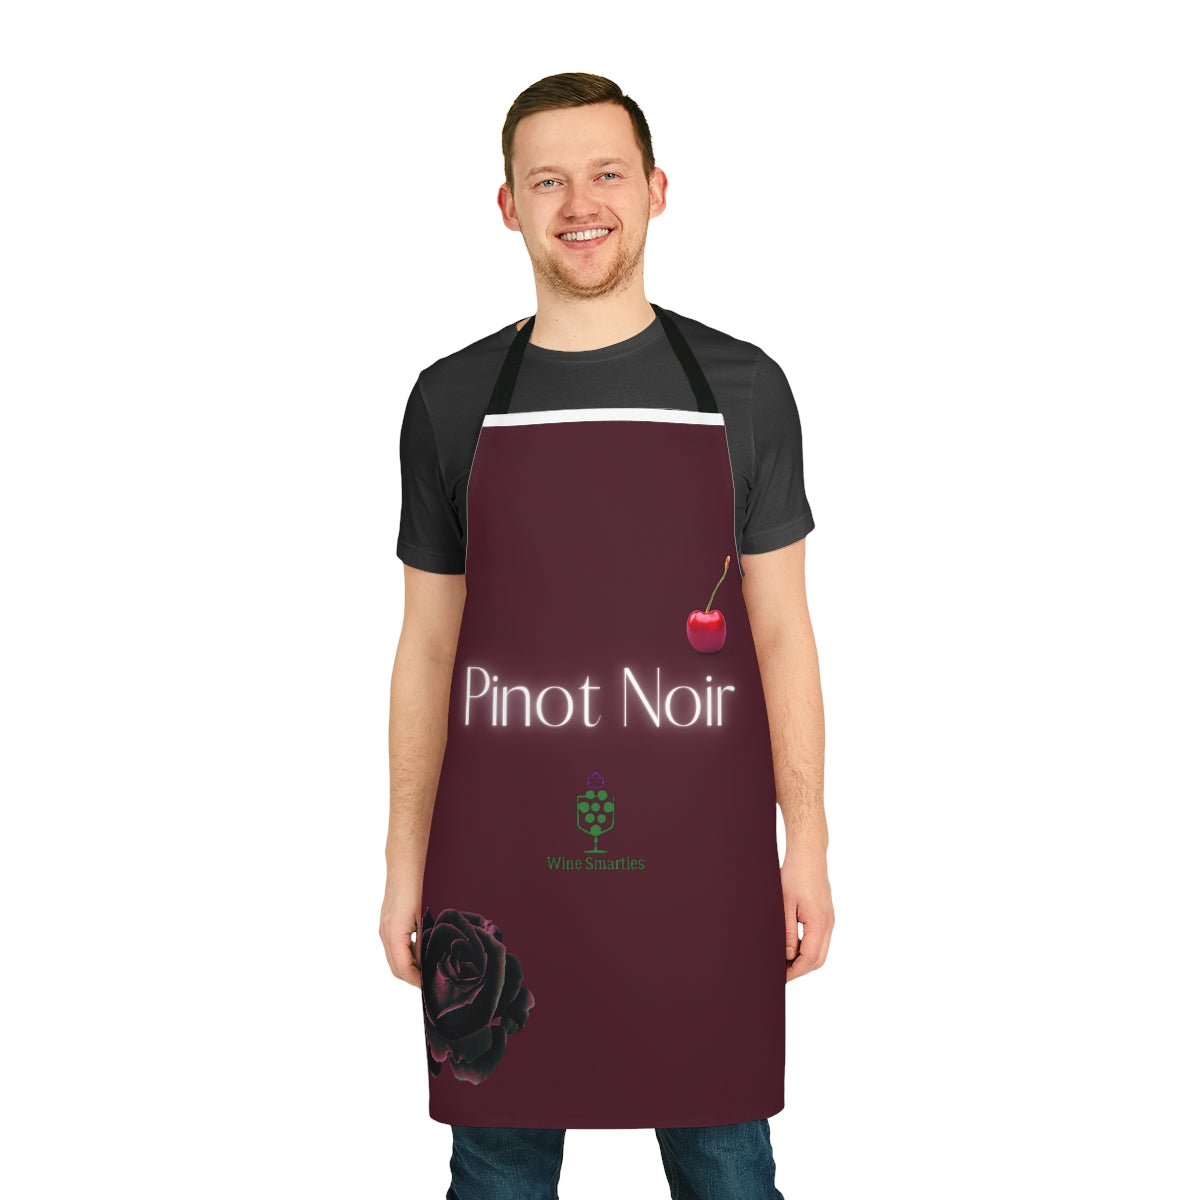 Riesling Apron